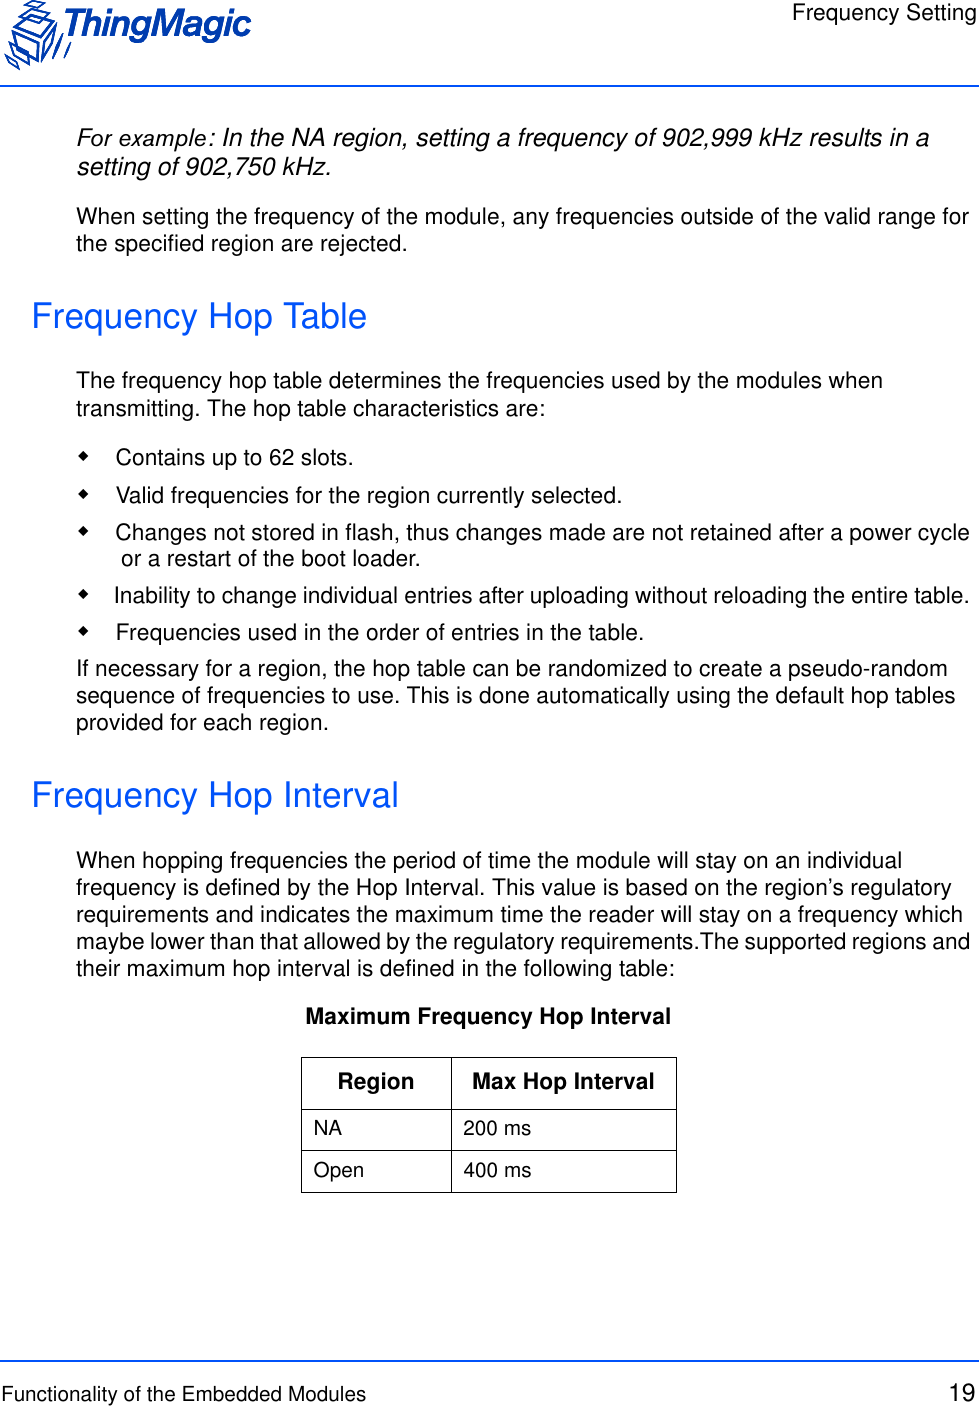 Frequency SettingFunctionality of the Embedded Modules 19For example: In the NA region, setting a frequency of 902,999 kHz results in a setting of 902,750 kHz.When setting the frequency of the module, any frequencies outside of the valid range for the specified region are rejected. Frequency Hop TableThe frequency hop table determines the frequencies used by the modules when transmitting. The hop table characteristics are: Contains up to 62 slots.  Valid frequencies for the region currently selected. Changes not stored in flash, thus changes made are not retained after a power cycle or a restart of the boot loader.  Inability to change individual entries after uploading without reloading the entire table.  Frequencies used in the order of entries in the table.If necessary for a region, the hop table can be randomized to create a pseudo-random sequence of frequencies to use. This is done automatically using the default hop tables provided for each region.Frequency Hop IntervalWhen hopping frequencies the period of time the module will stay on an individual frequency is defined by the Hop Interval. This value is based on the region’s regulatory requirements and indicates the maximum time the reader will stay on a frequency which maybe lower than that allowed by the regulatory requirements.The supported regions and their maximum hop interval is defined in the following table:Maximum Frequency Hop IntervalRegion Max Hop IntervalNA 200 msOpen 400 ms